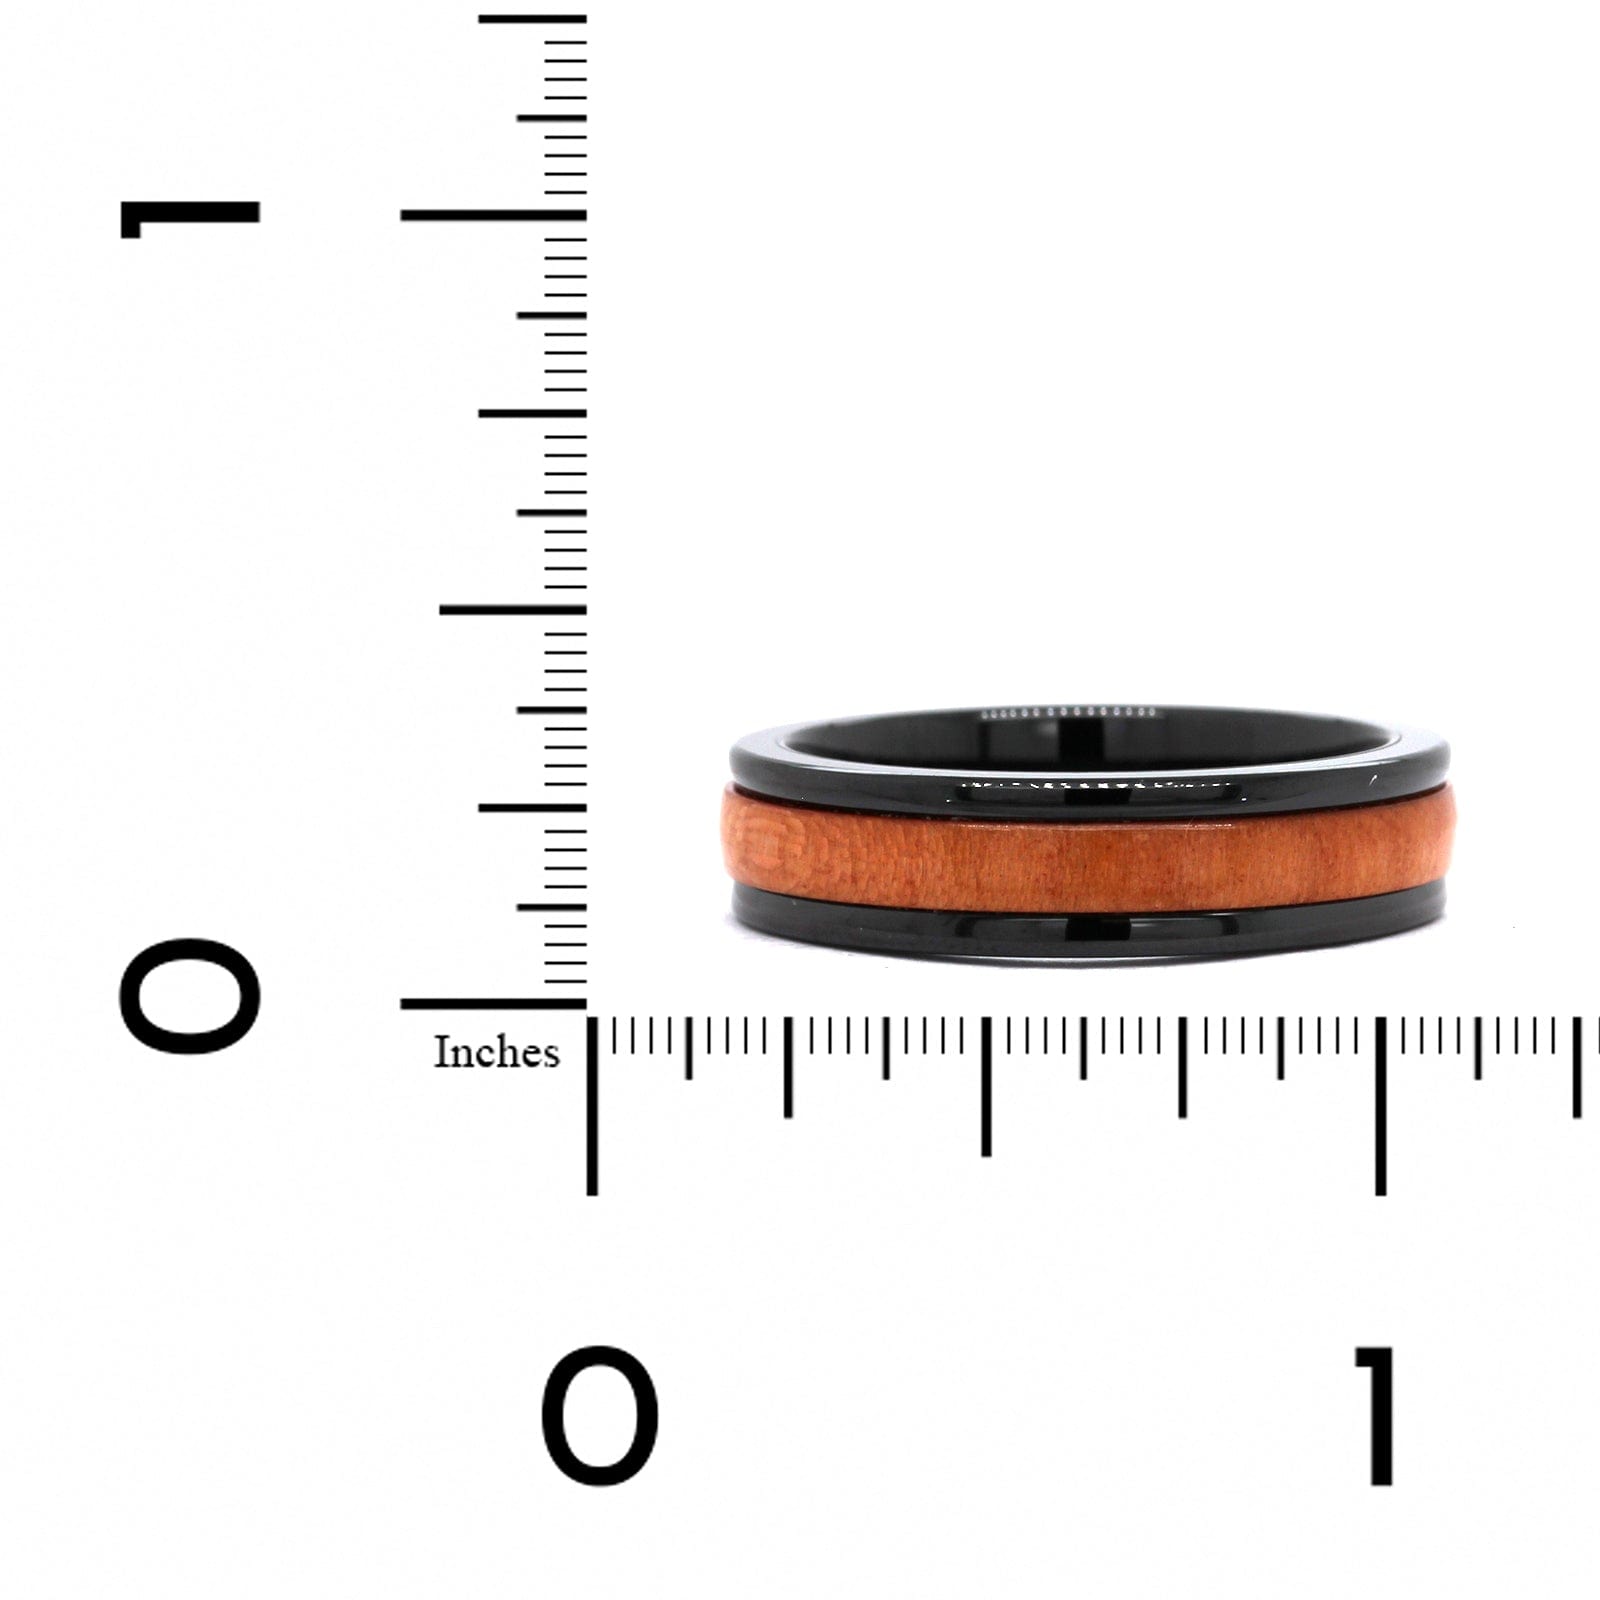 Black Tungsten Band with Wood Center and Polish Edges